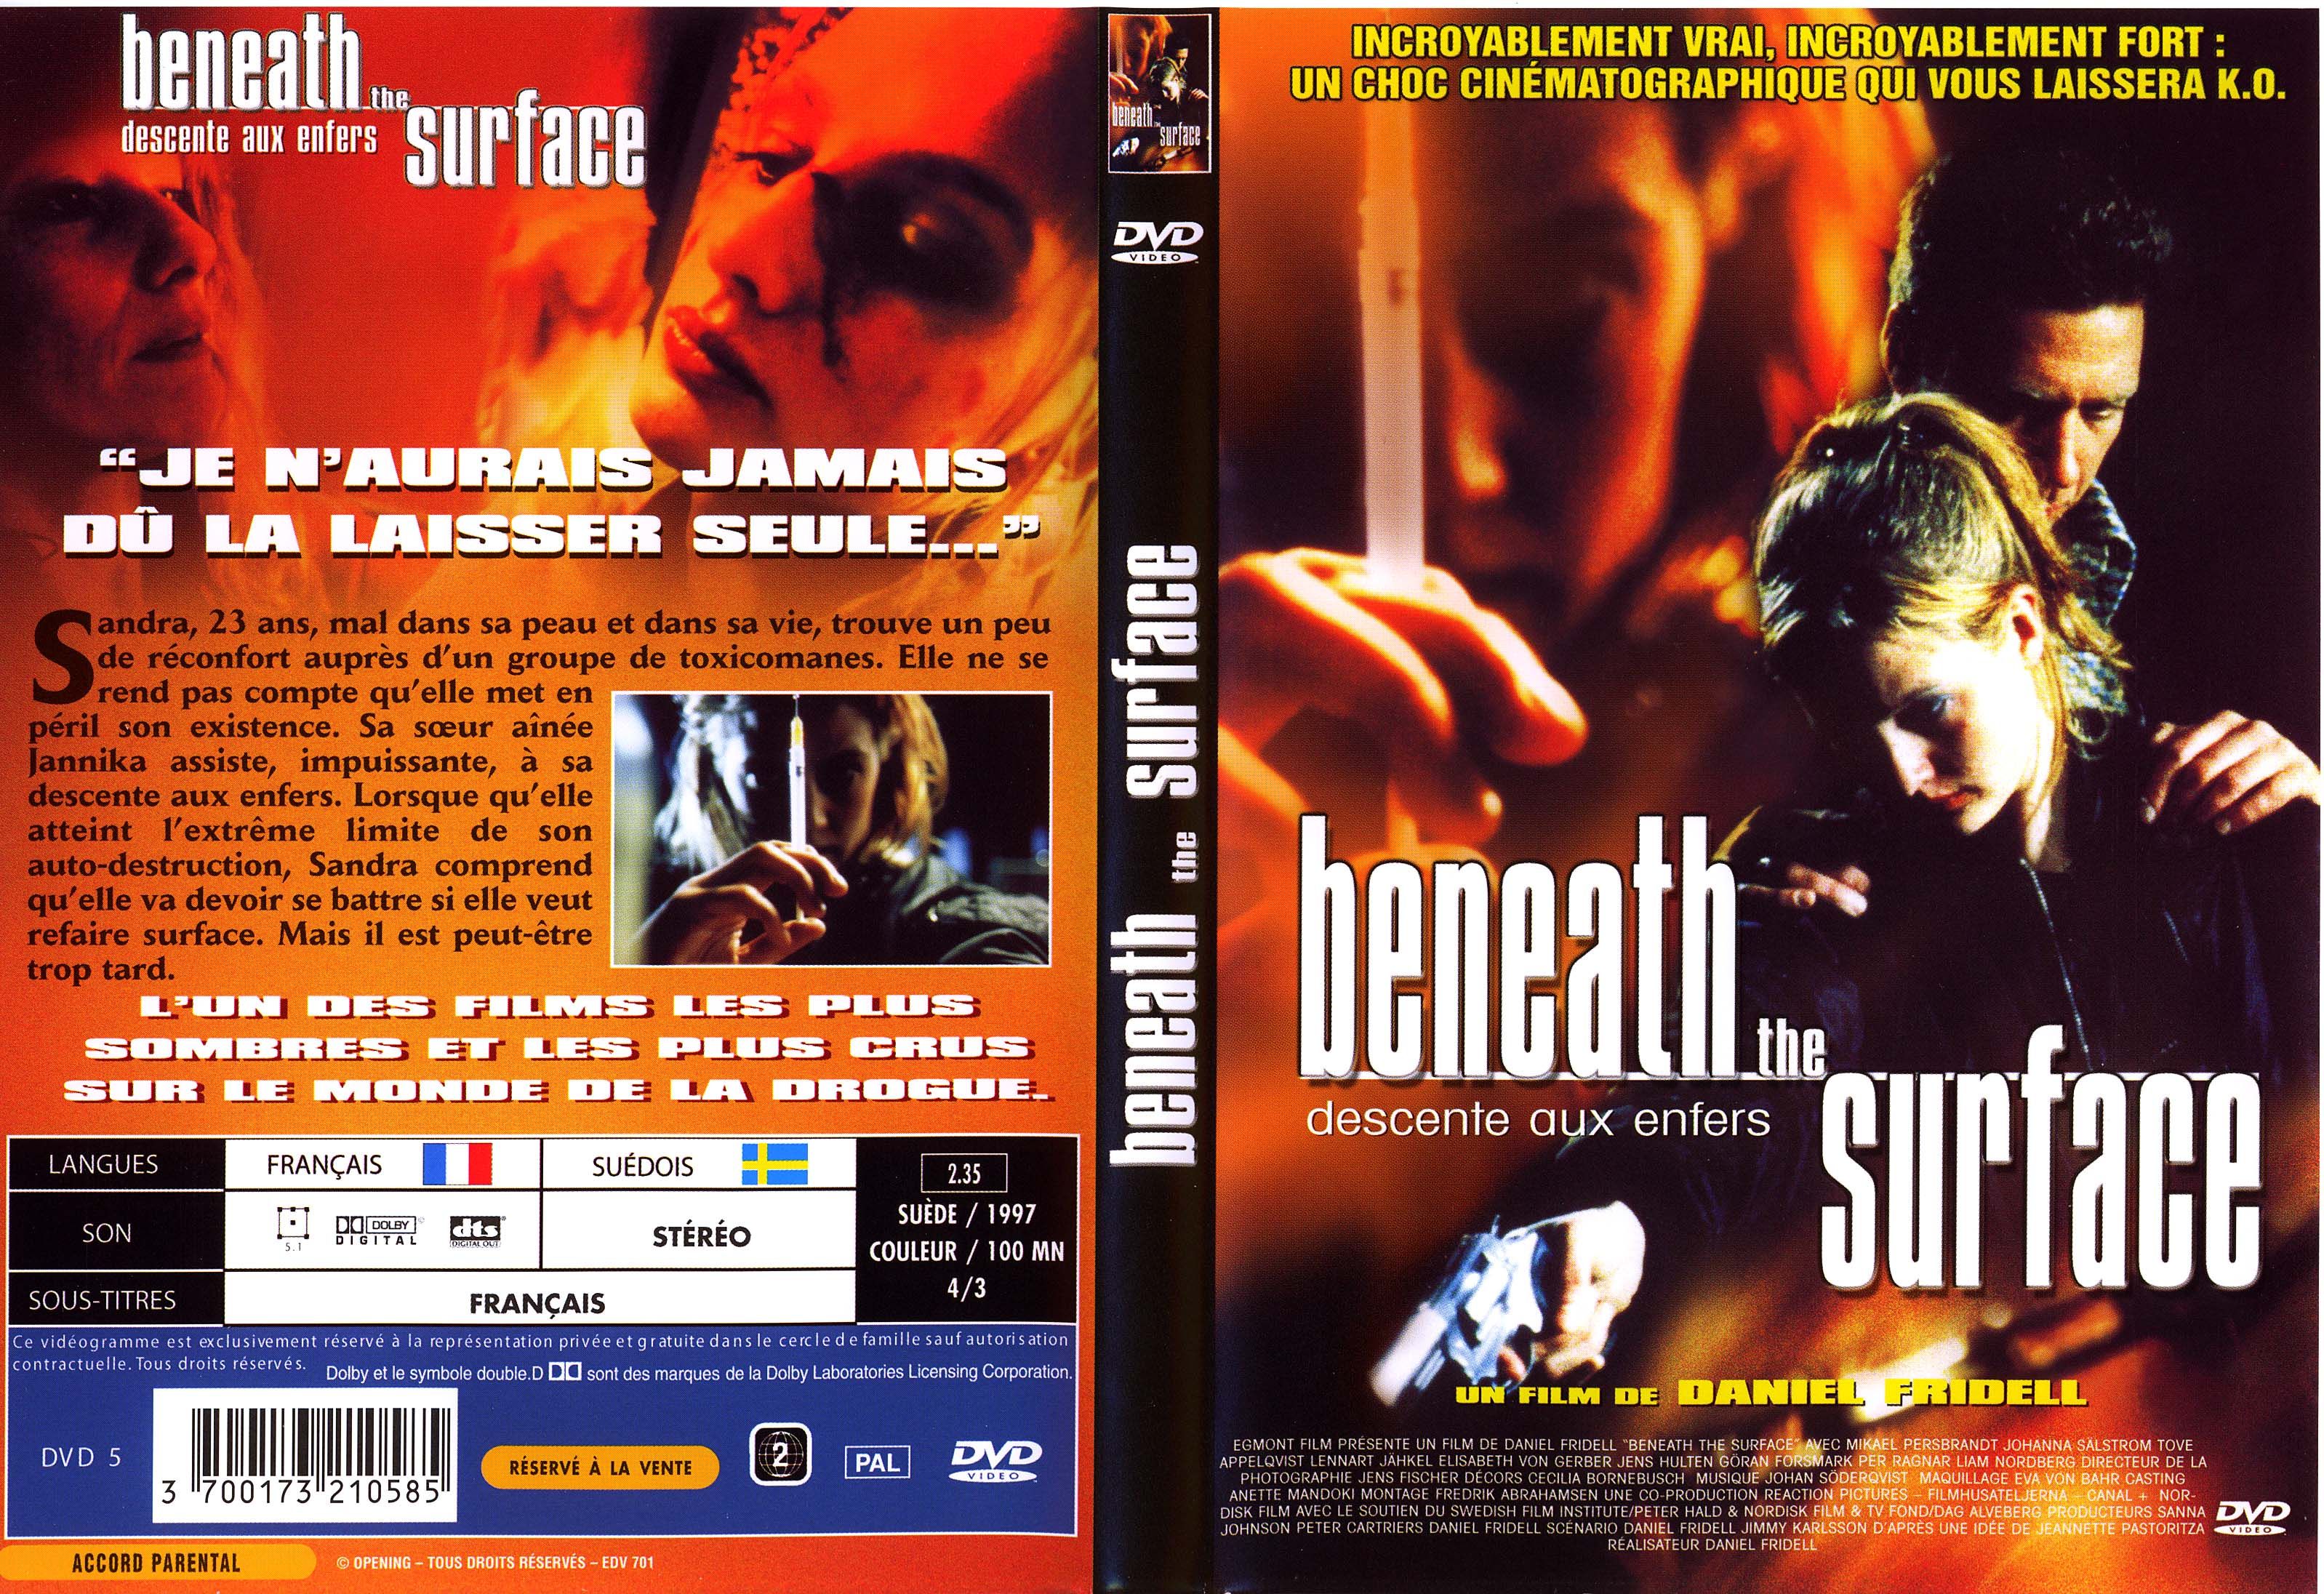 Jaquette DVD Beneath the surface